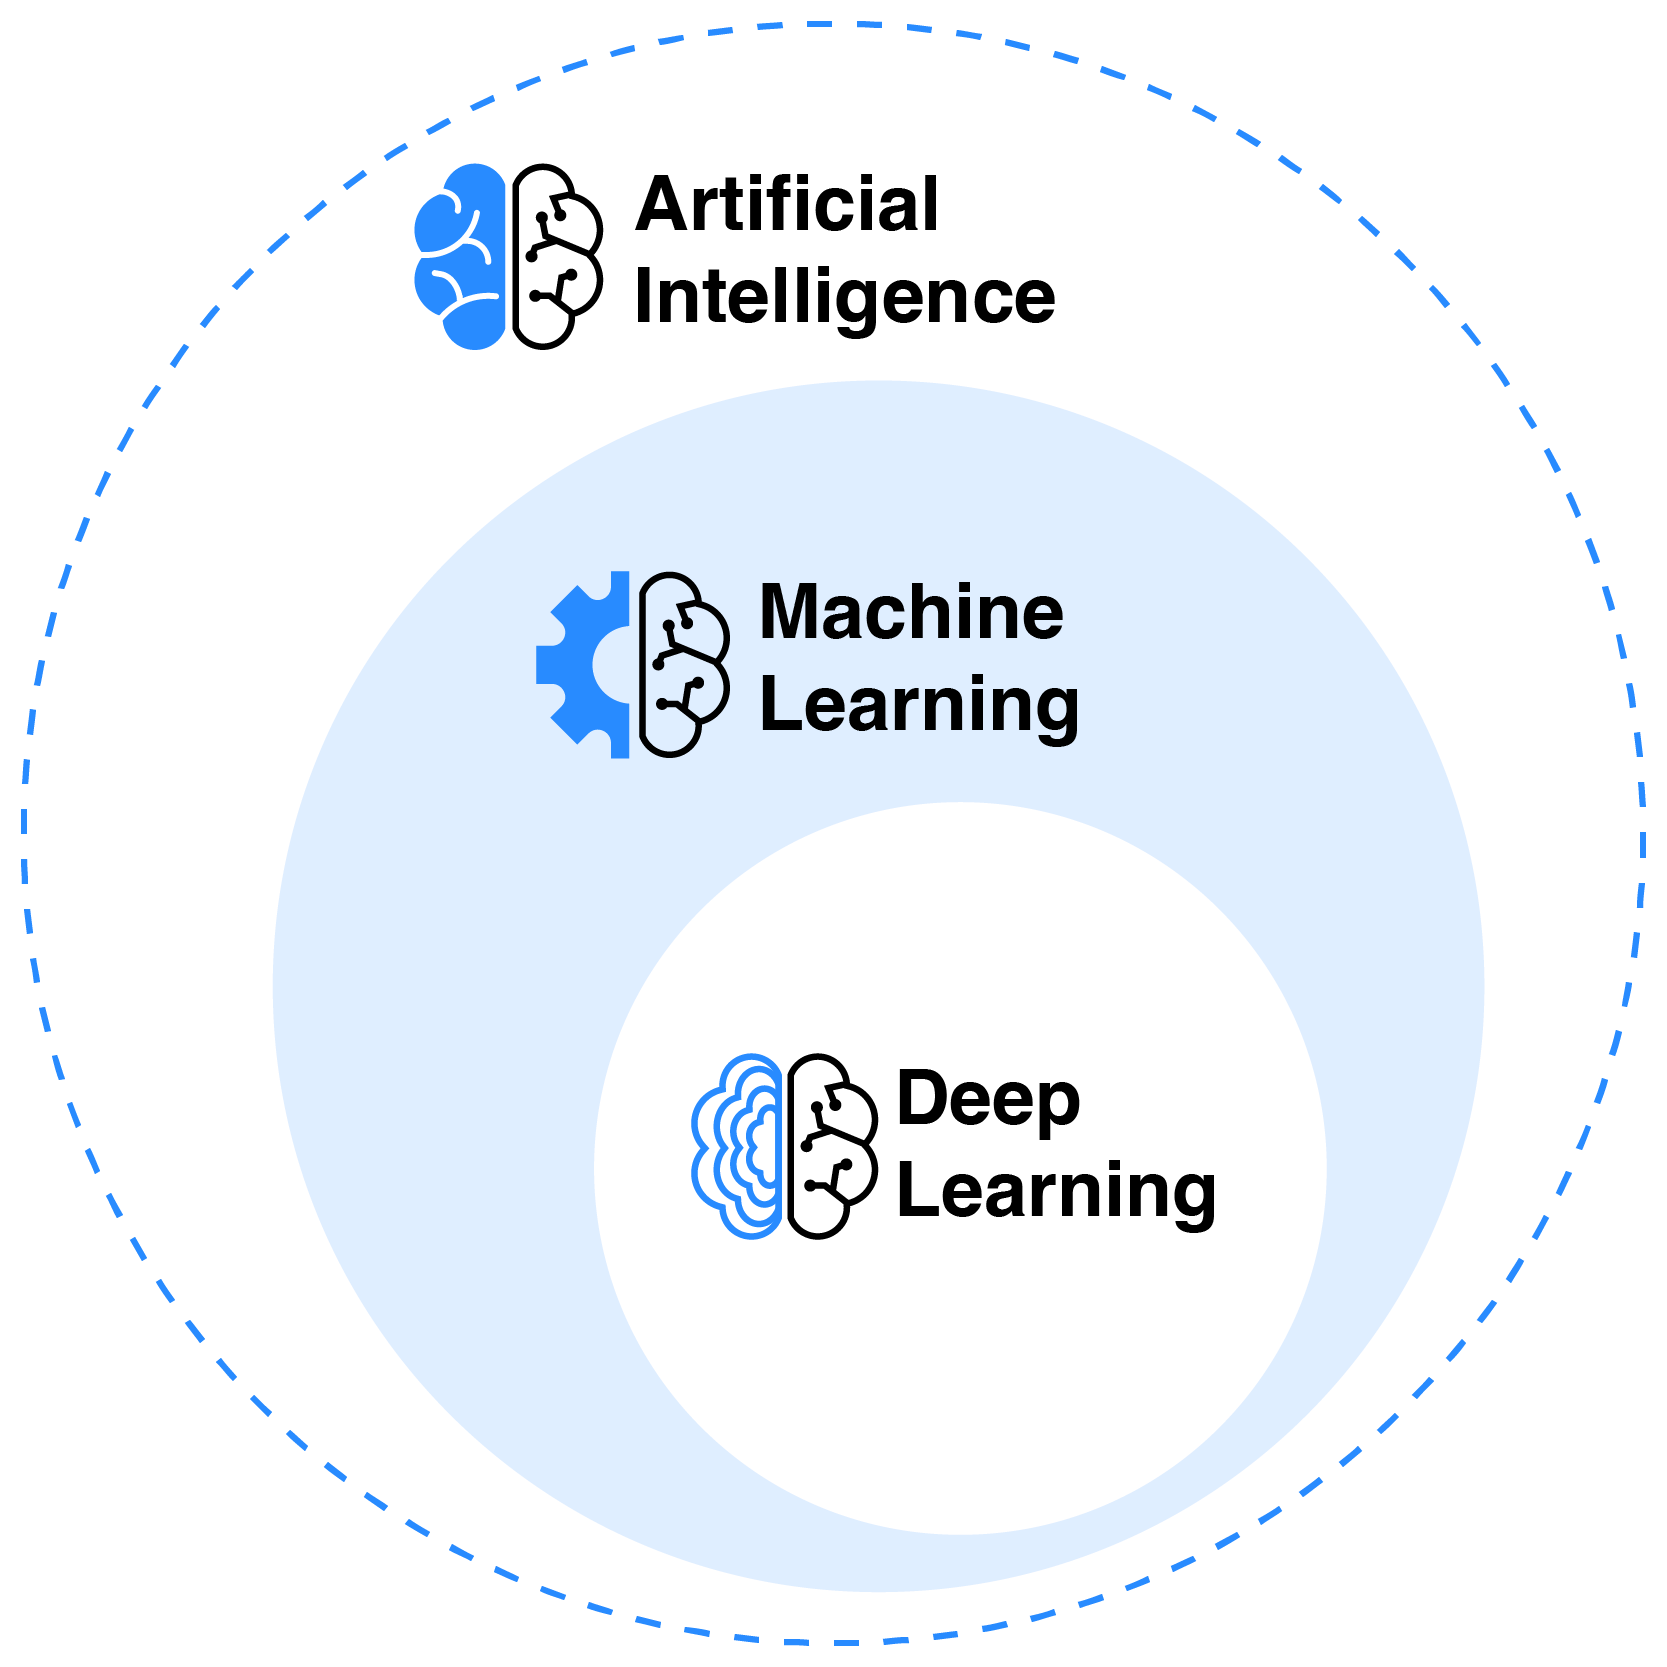 Large circle that says "Artificial Intelligence," inside that is a smaller circle that says "Machine Learning," and inside the Machine Learning circle is a smaller circle that says "Deep Learning."